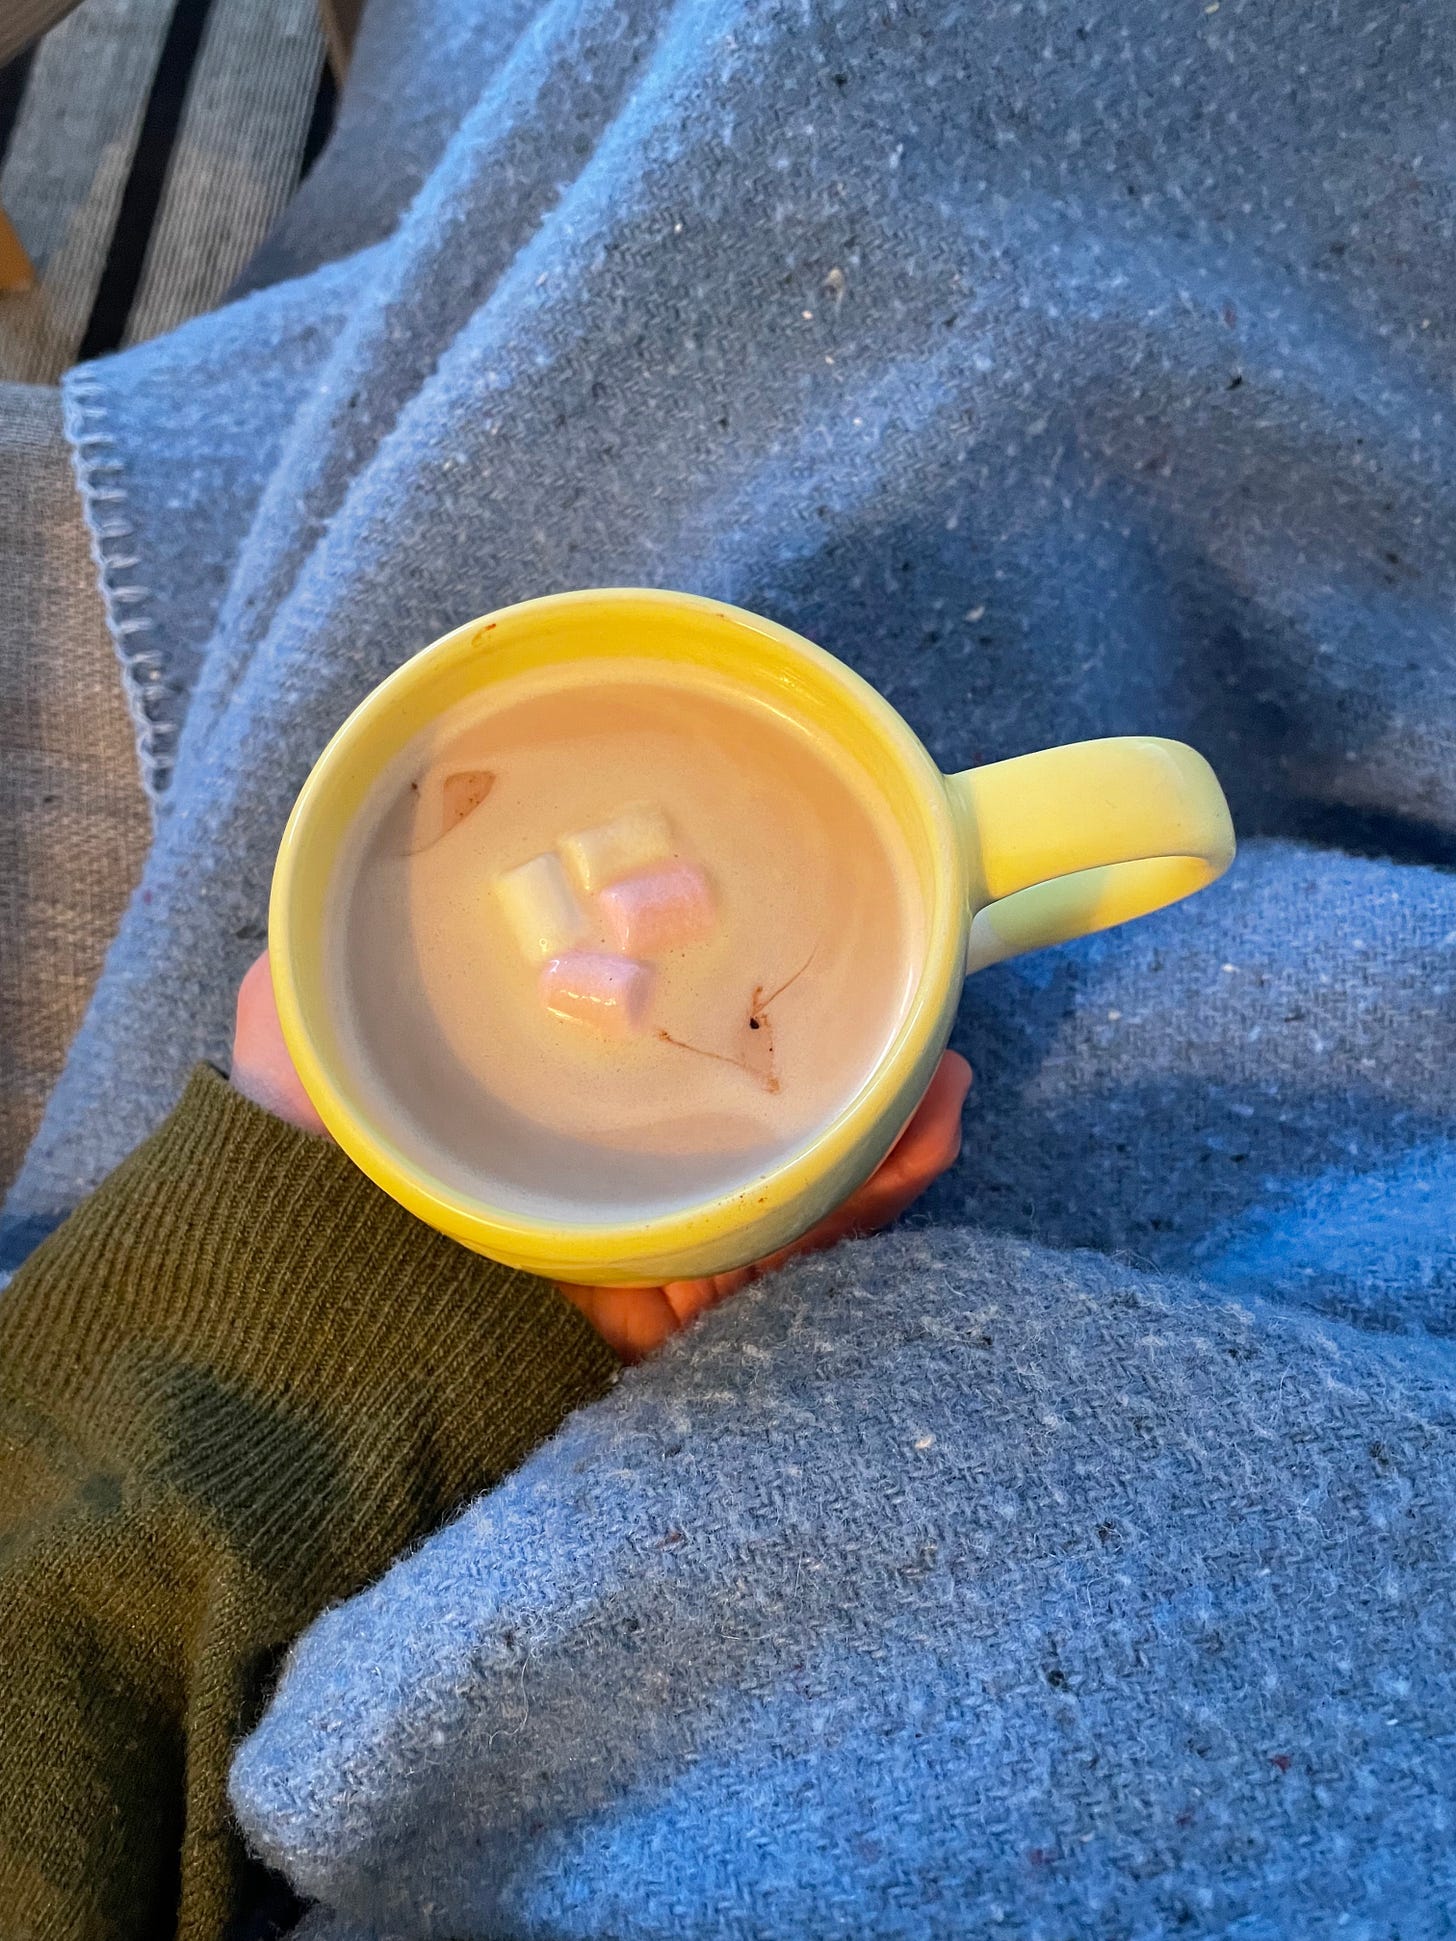 Cup of hot chocolate with melting pink and white mini marshmallows. In the background, a woollen blanket and a rug. A person drinking hot chocolate on the couch, watching TV.